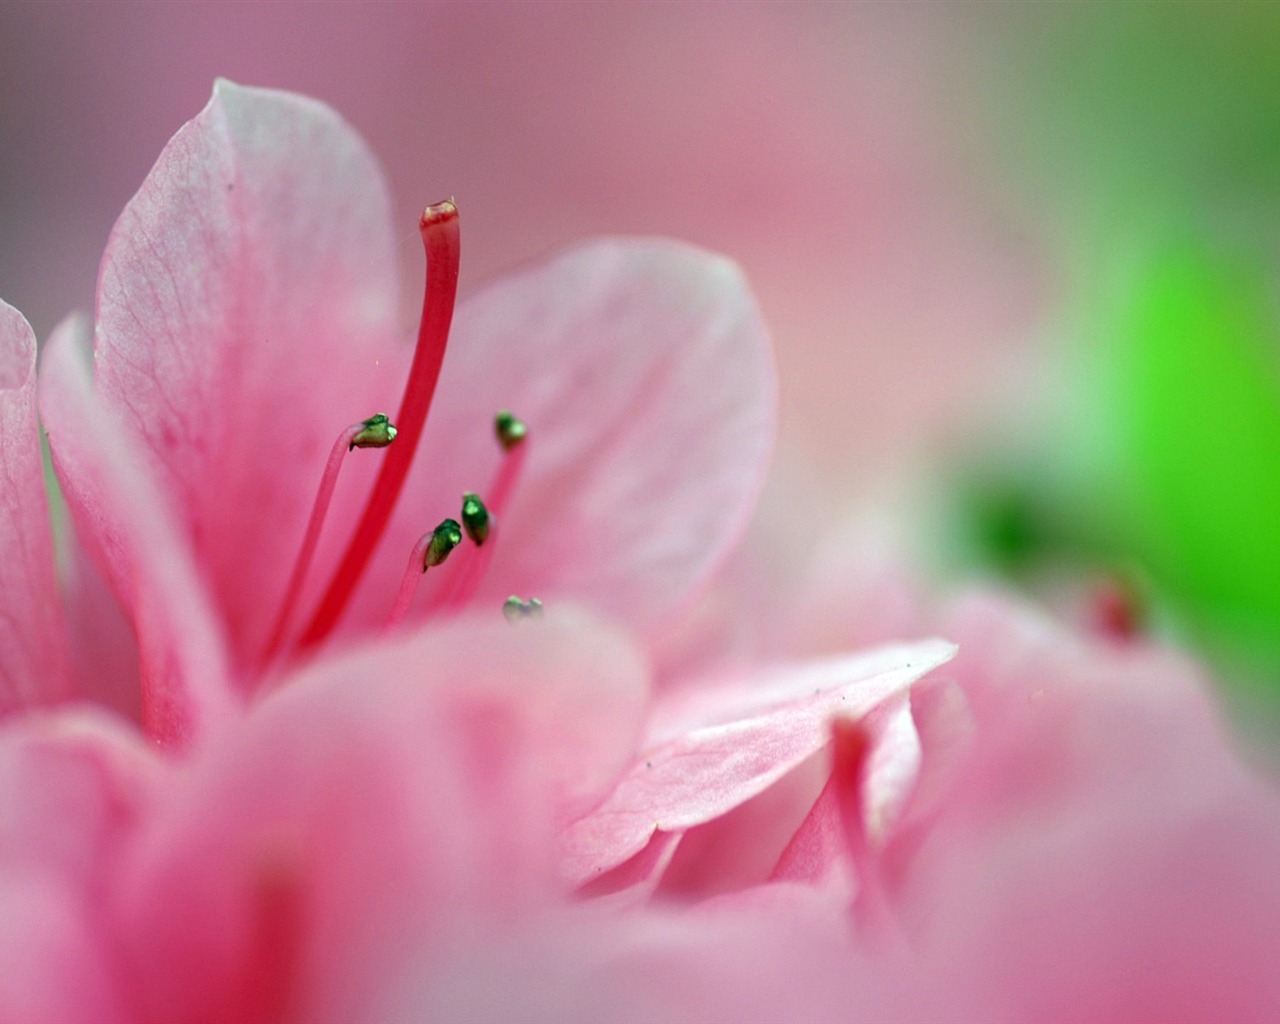 Personal Flowers HD Wallpapers #46 - 1280x1024